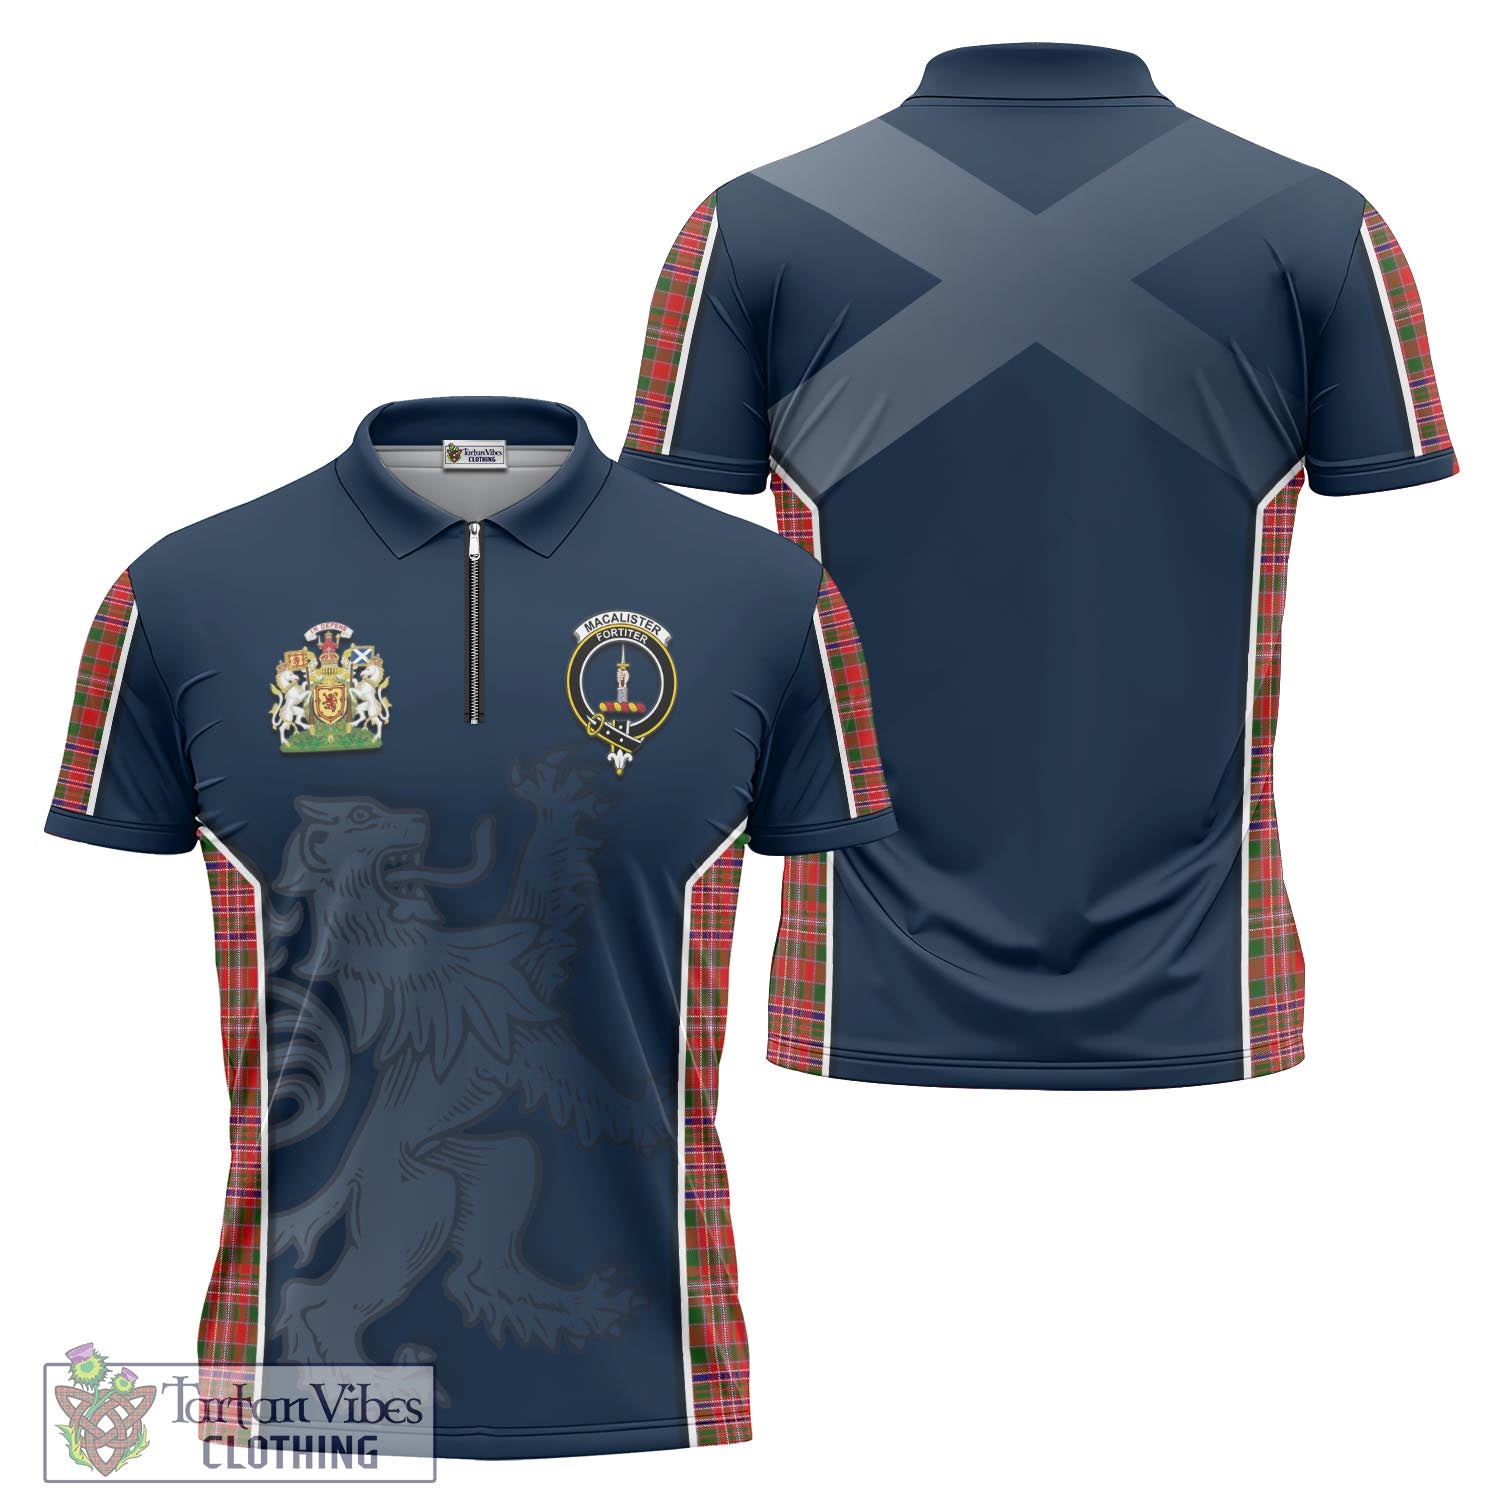 Tartan Vibes Clothing MacAlister Modern Tartan Zipper Polo Shirt with Family Crest and Lion Rampant Vibes Sport Style